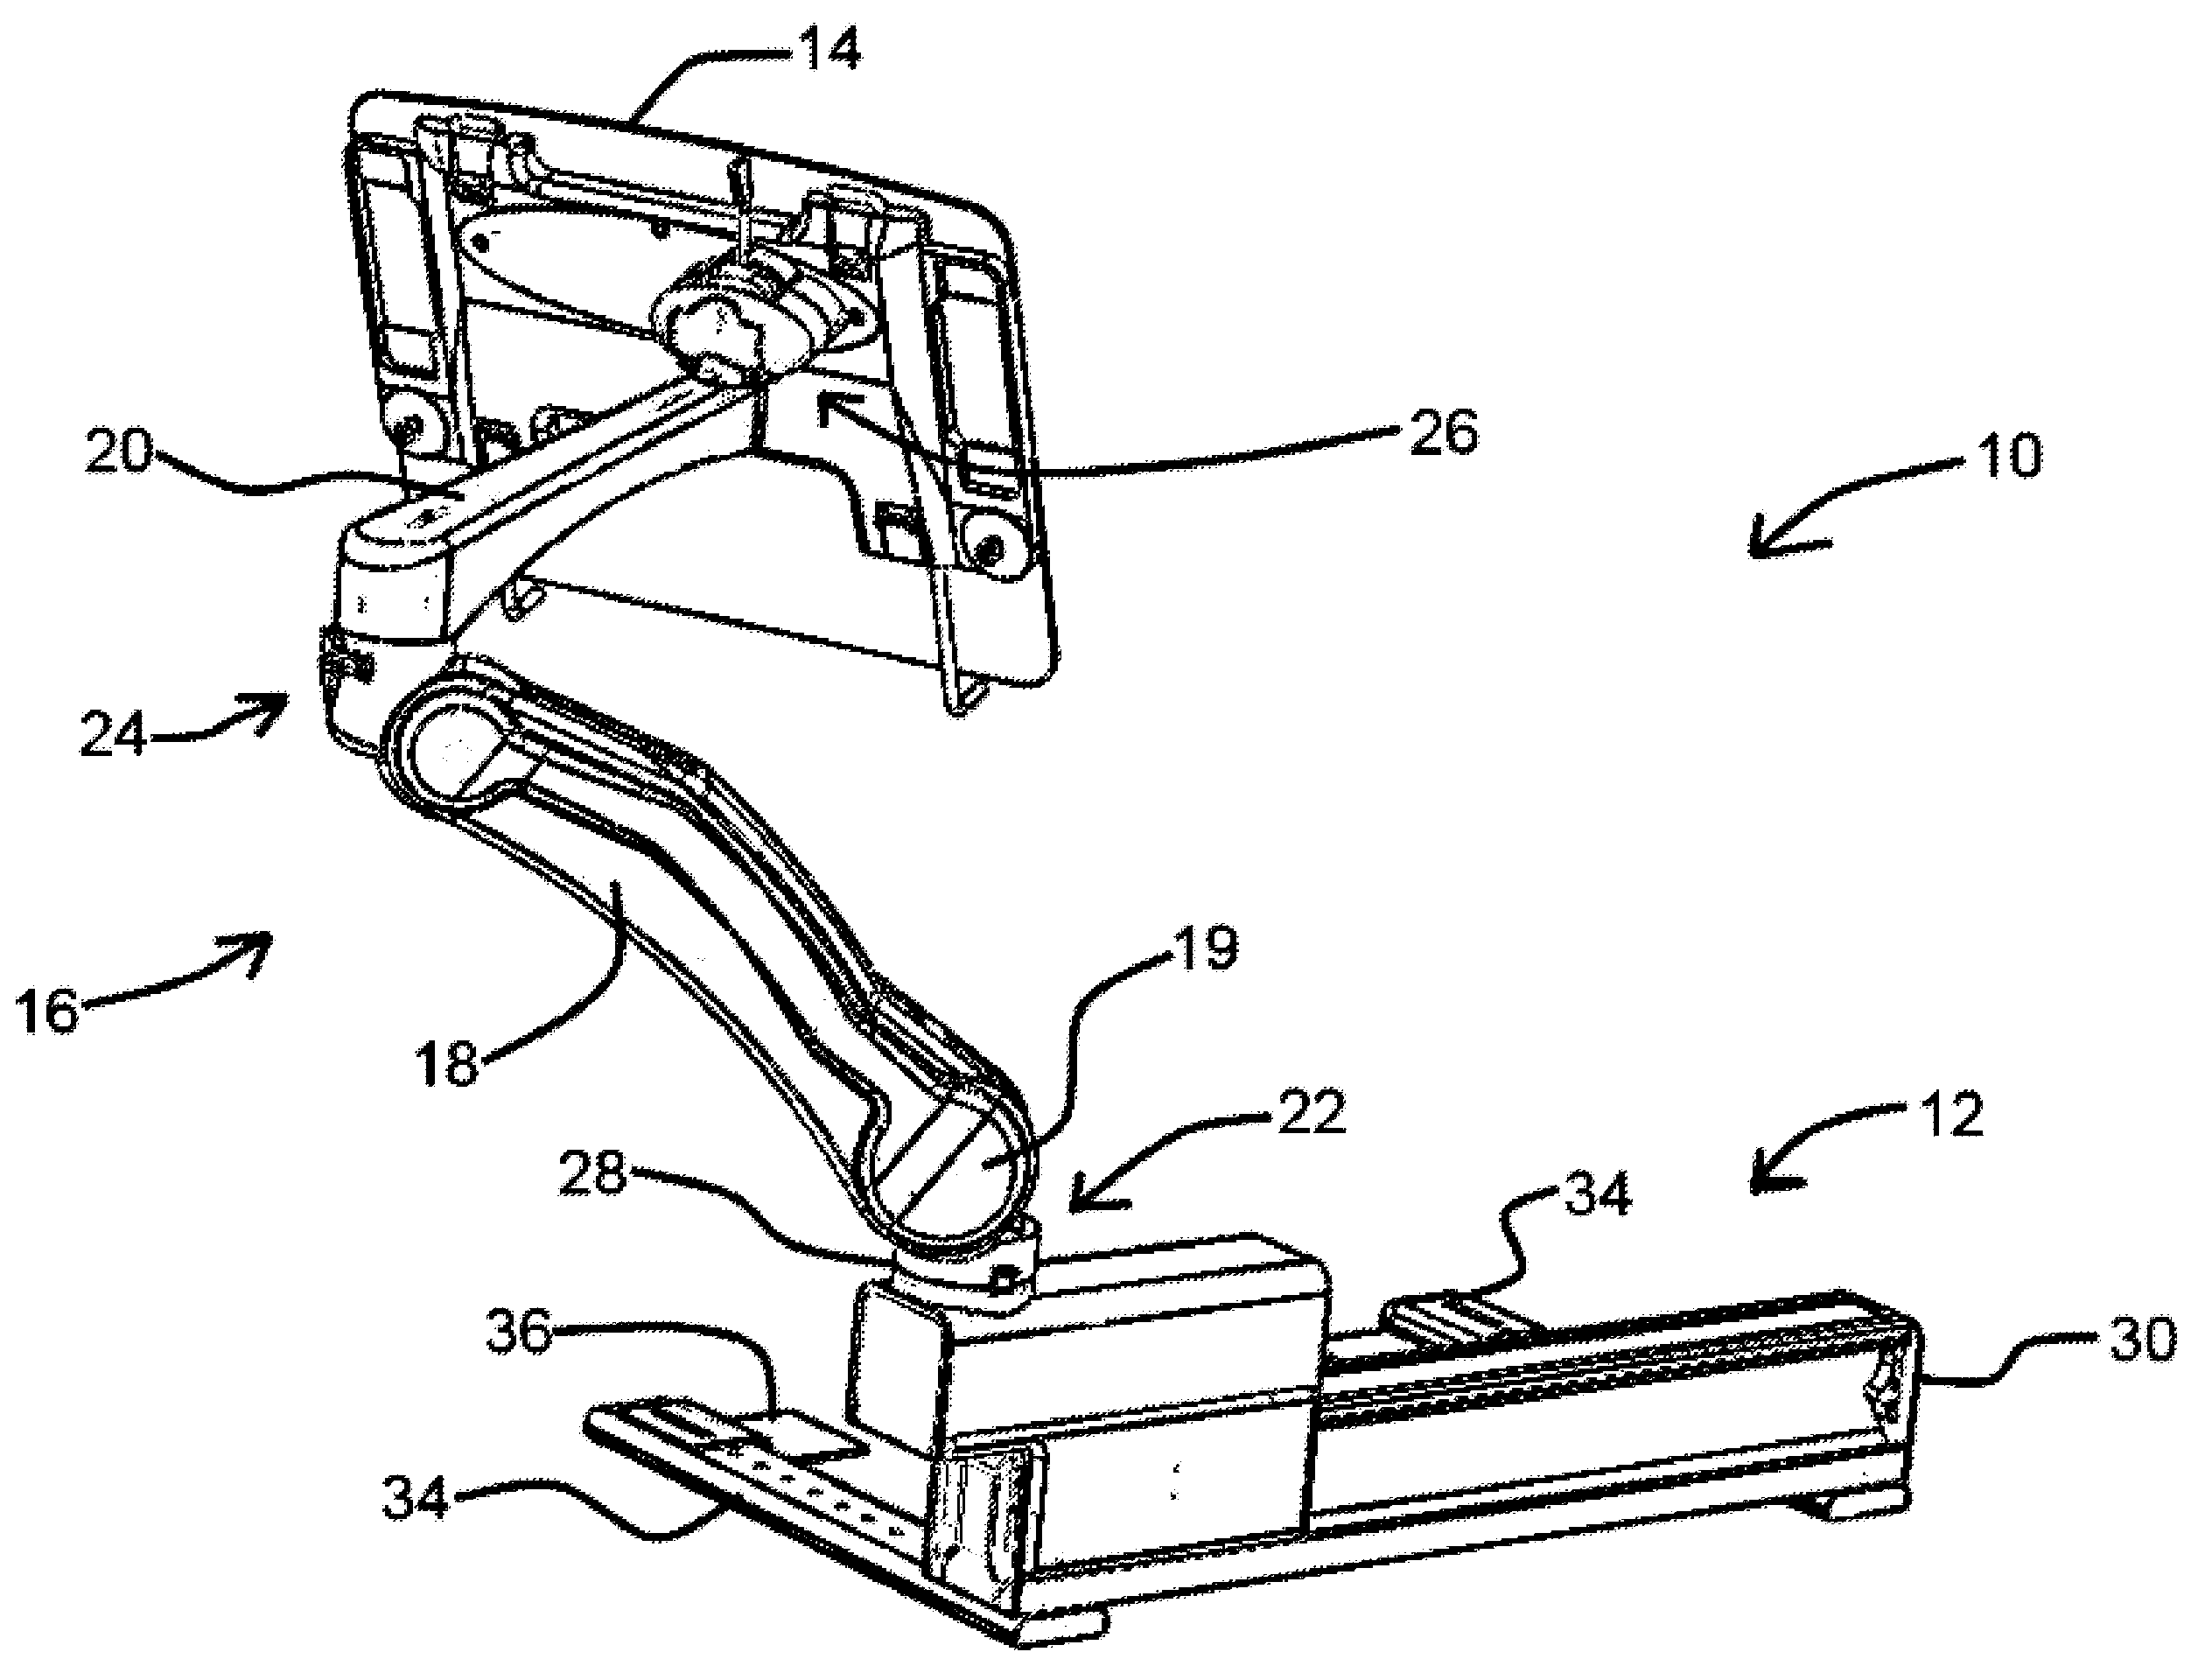 Self-stowing support table with articulating arm